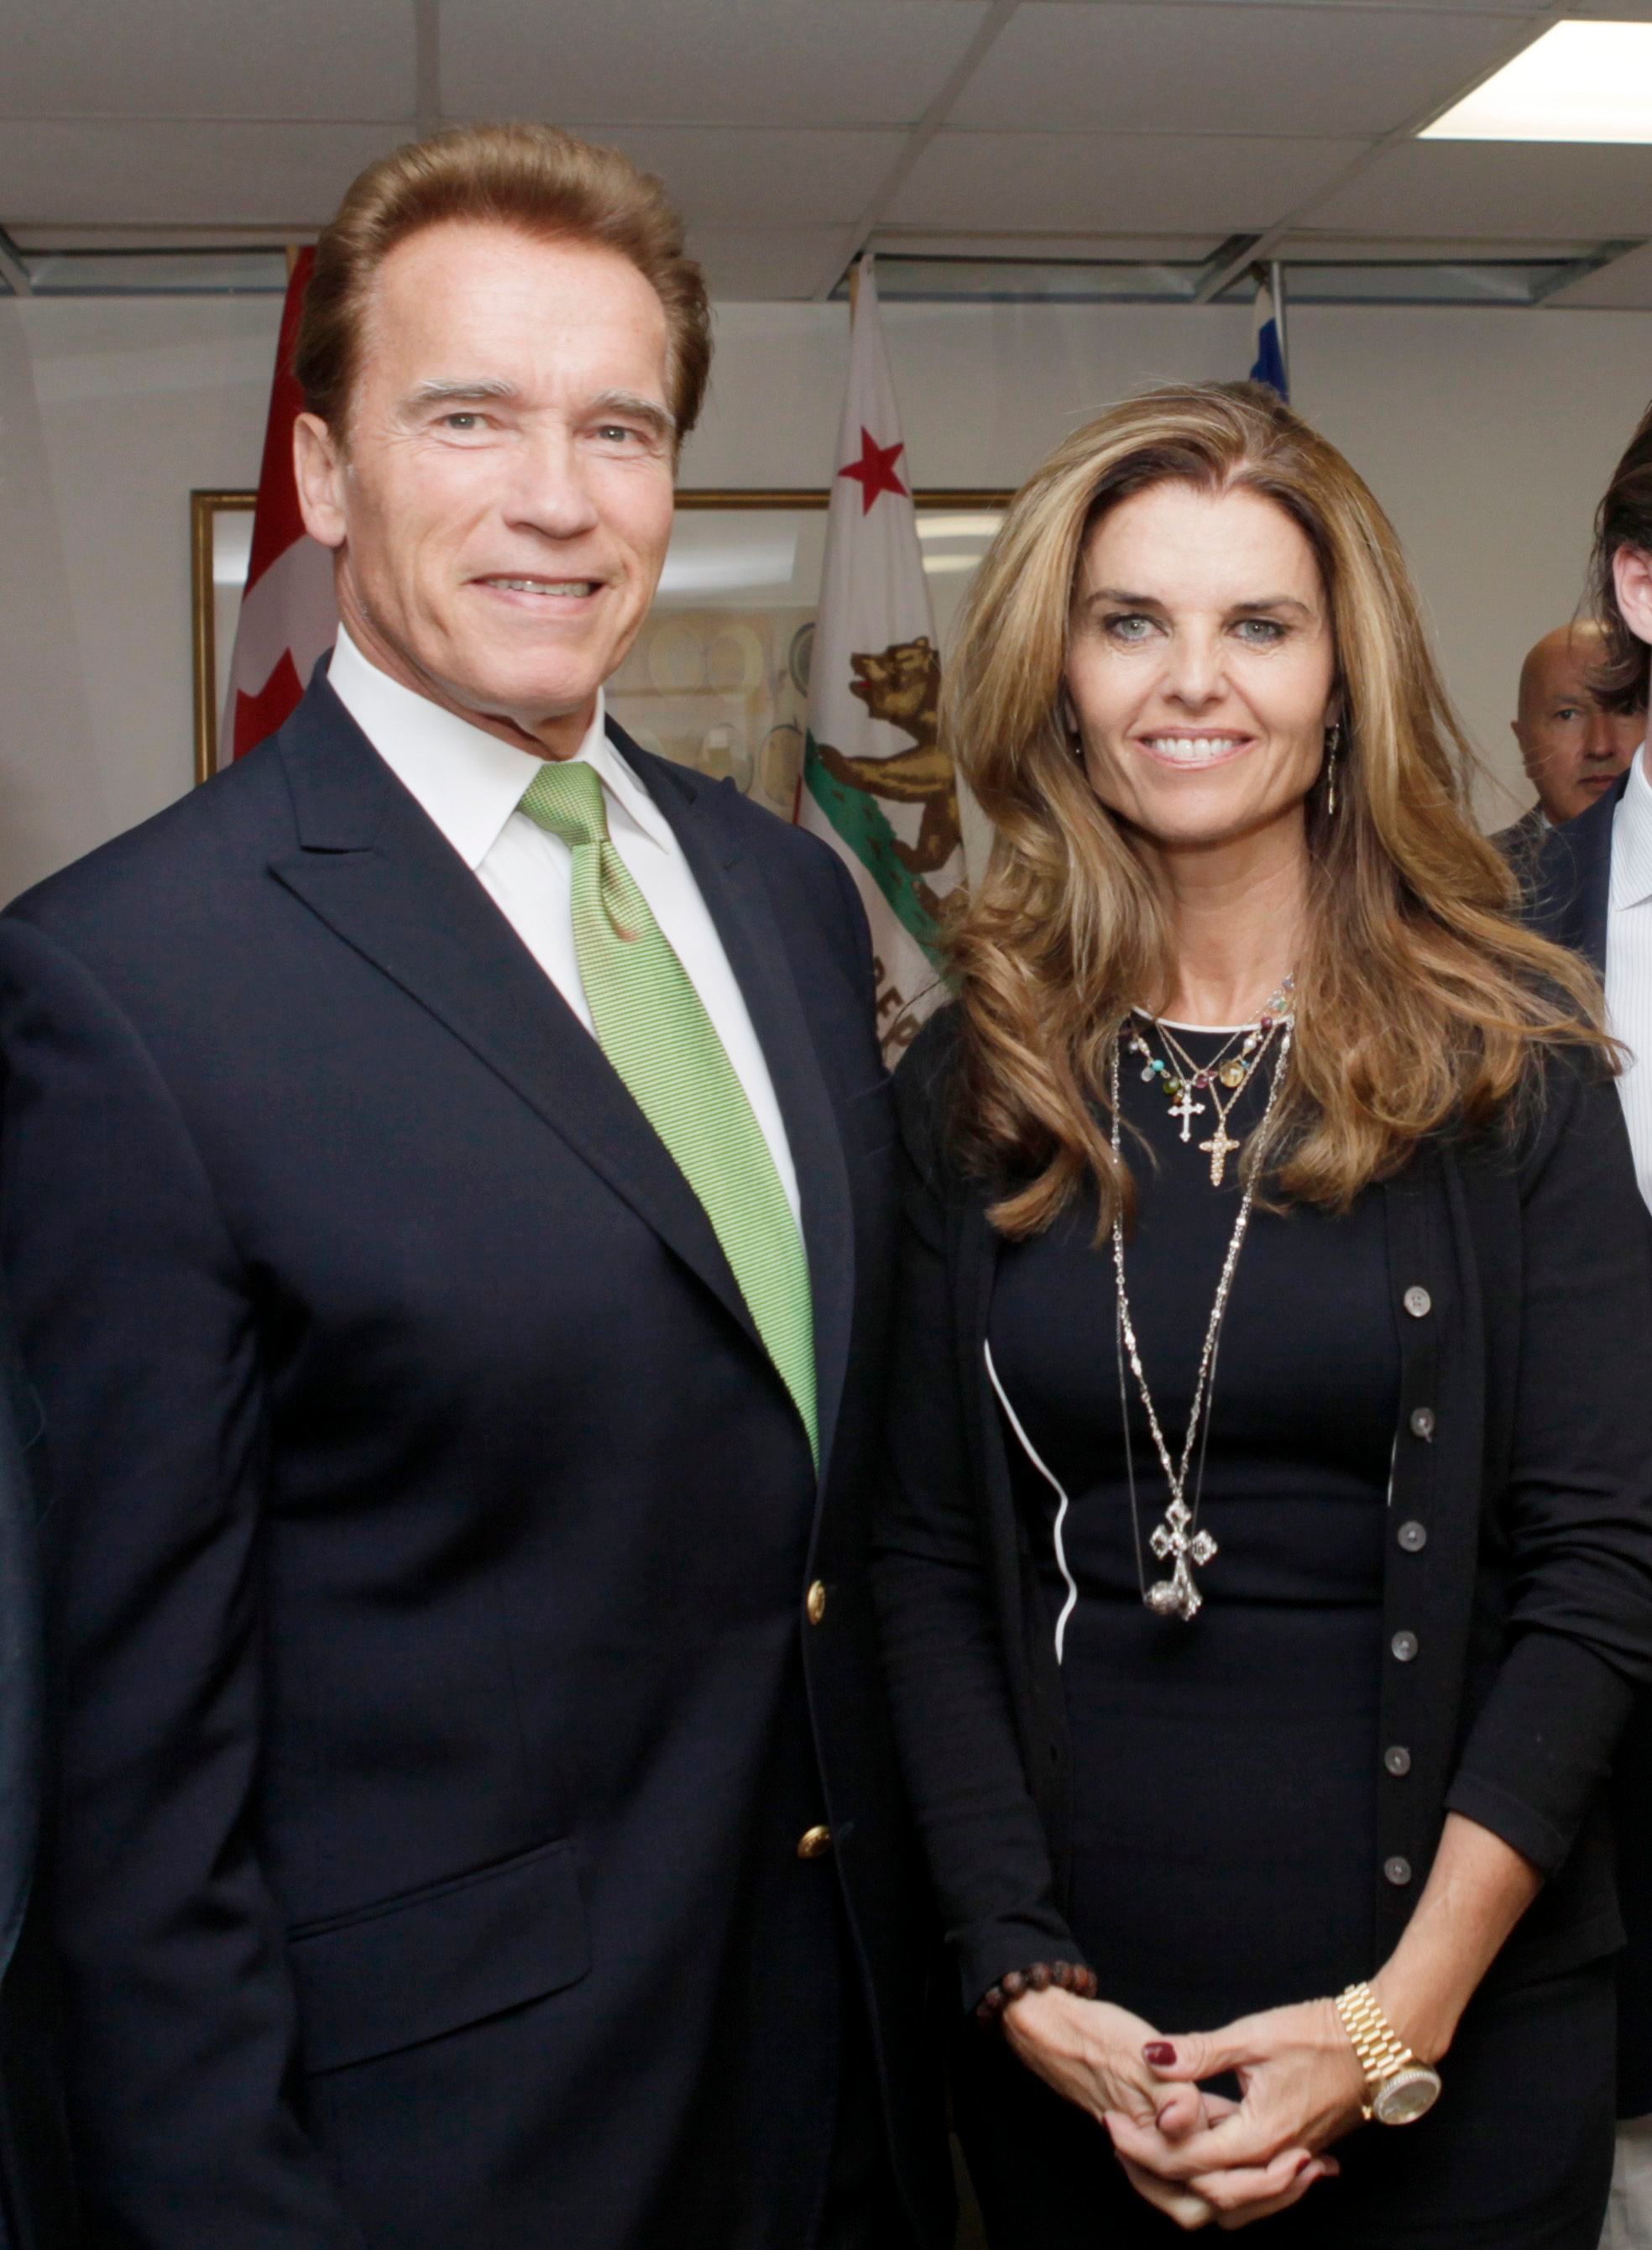 <p><span>It took 14 years for the news to come out: Back in 1997, Mildred "Patty" Baena -- the Schwarzenegger family maid -- gave birth to Arnold Schwarzenegger's child, Joseph Baena, just days after the actor's wife, Maria Shriver, gave birth to their son Christopher. Arnold's alleged womanizing -- with other ladies -- had previously made headlines while he was running for California governor in 2003. Maria filed for divorce in the summer of 2011 after discovering Arnold's betrayal; it was finalized a decade later in 2021.</span></p><p>In the 2023 Netflix docu-series "Arnold," the actor-politician revealed the moment he finally came clean to his wife. "Maria and I went to counseling once a week and in one of the sessions the counselor said, 'I think today Maria wants to be very specific about something. She wants to know if you are the father of Joseph.' And I was like — I thought my heart stopped, and then I told the truth," Arnold recalled. "'Yes, Maria, Joseph is my son,'" he told her. "She was crushed because of that. I had an affair in '96. In the beginning I really didn't know. I just started feeling the older he got the more it became clear to me and then it was really just a matter of how do you keep this quiet? How do you keep this a secret?"</p><p>Arnold lamented his behavior. "I think that I have caused enough pain for my family because of my f*** up. Everyone had to suffer. Maria had to suffer. The kids had to suffer. Joseph. His mother. Everyone," Arnold said, further confessing in the docu-series, "I am going to have to live with it the rest of my life. People will remember my successes and they will also remember my failures. This is a major failure. I had failures in the past in my career, but this is a whole different ball game, dimension of failure."</p><p>MORE: <a href="https://www.wonderwall.com/celebrity/couples/what-went-wrong-kylie-jenner-and-travis-scott-are-off-again-following-late-2022-cheating-allegations-more-splits-of-2023-691804.gallery">Celebrity splits of 2023</a></p>